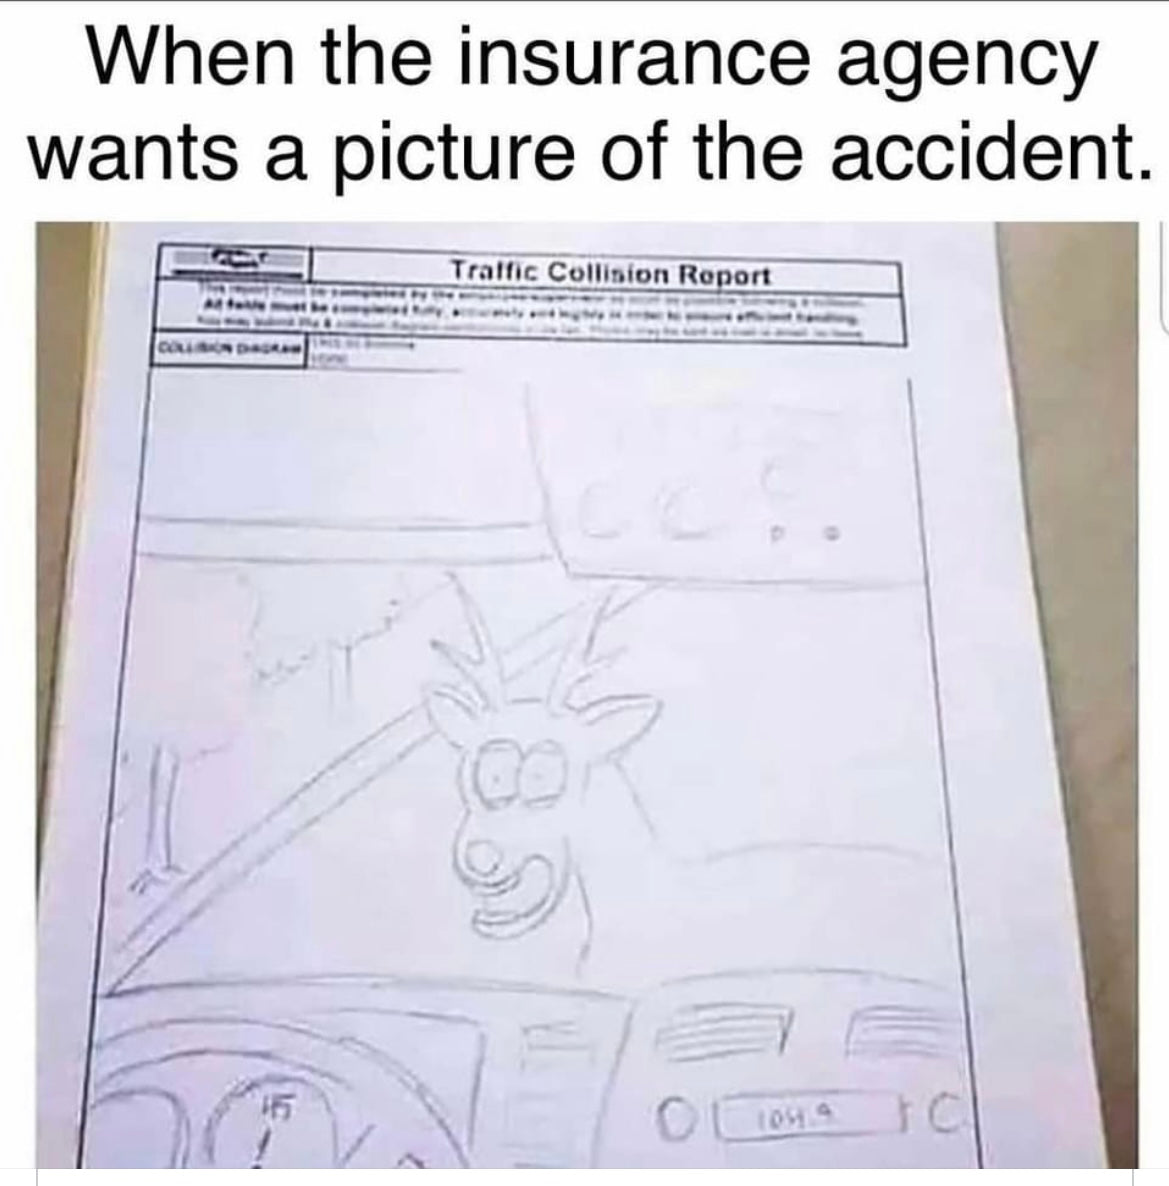 When the insurance company wants a picture of the accident